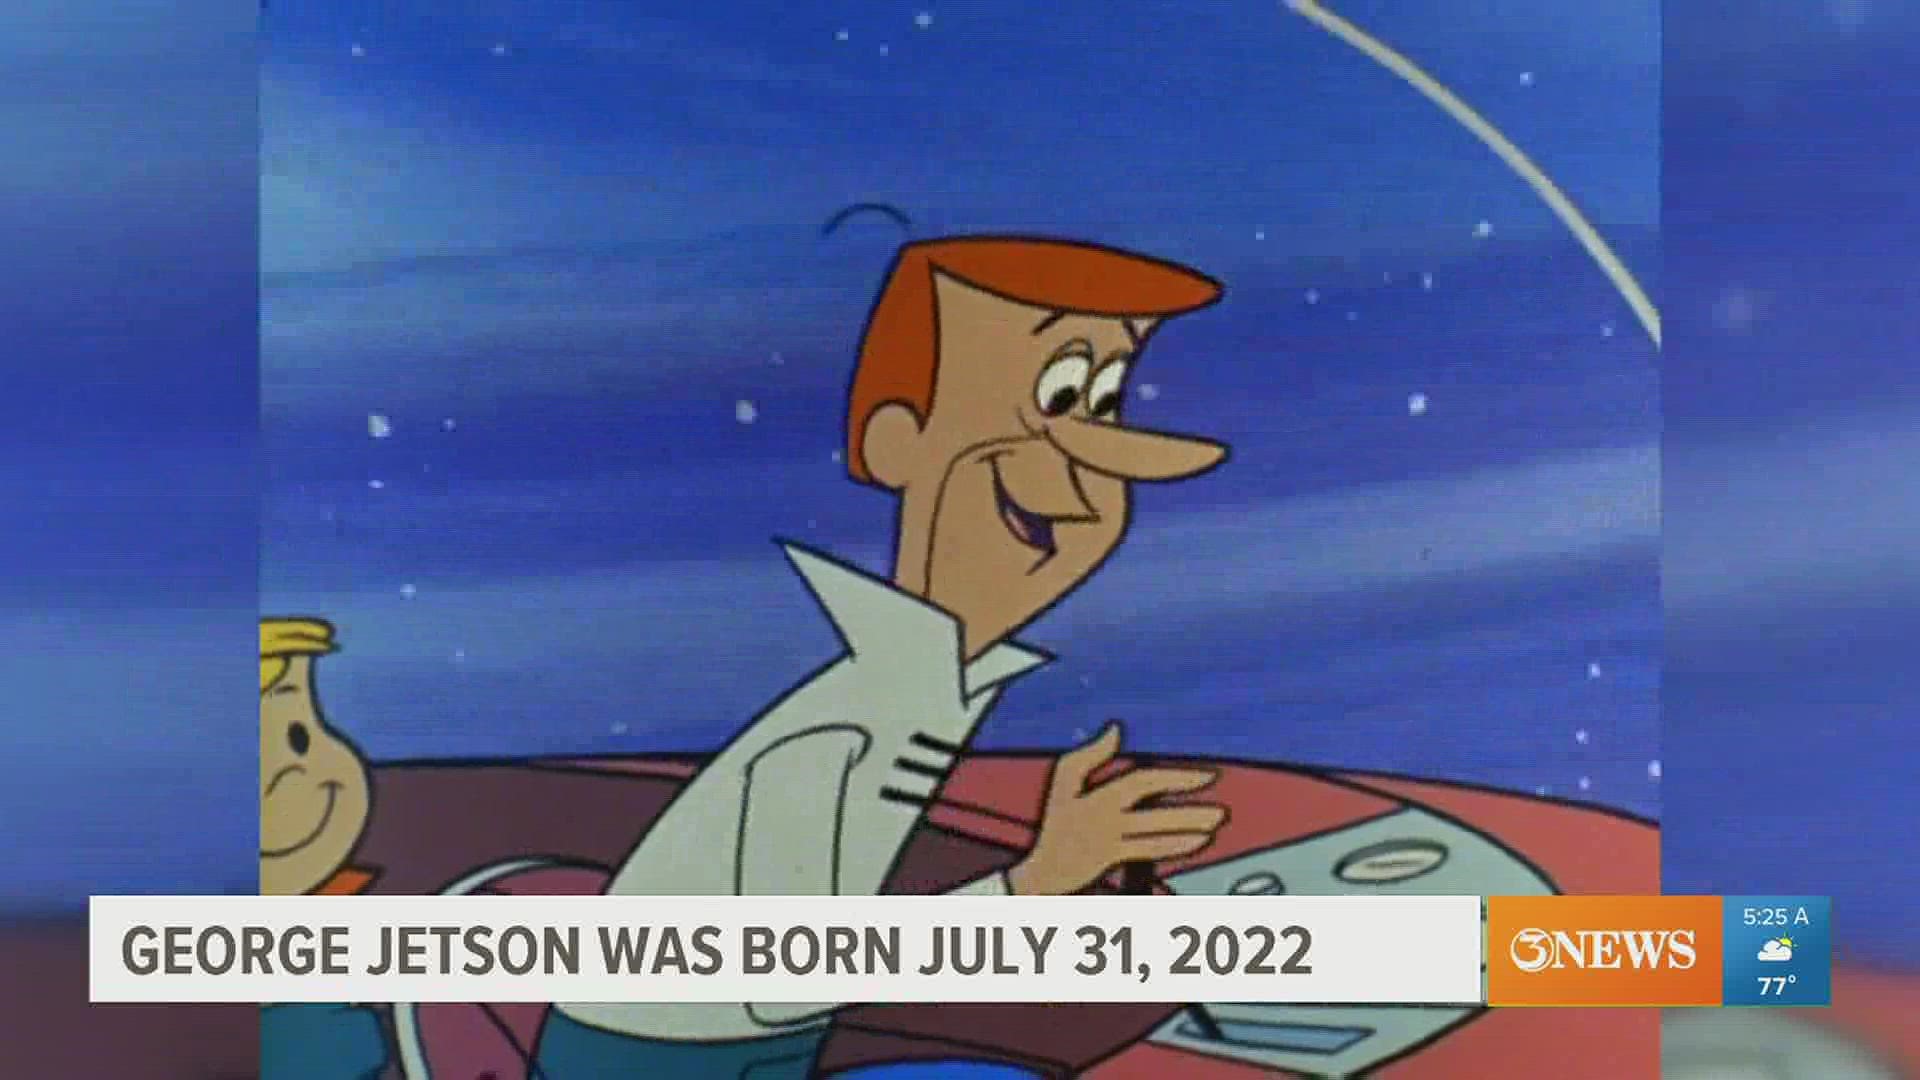 A viral post on Twitter claimed George Jetson was born July 31, 2022. It adds up.